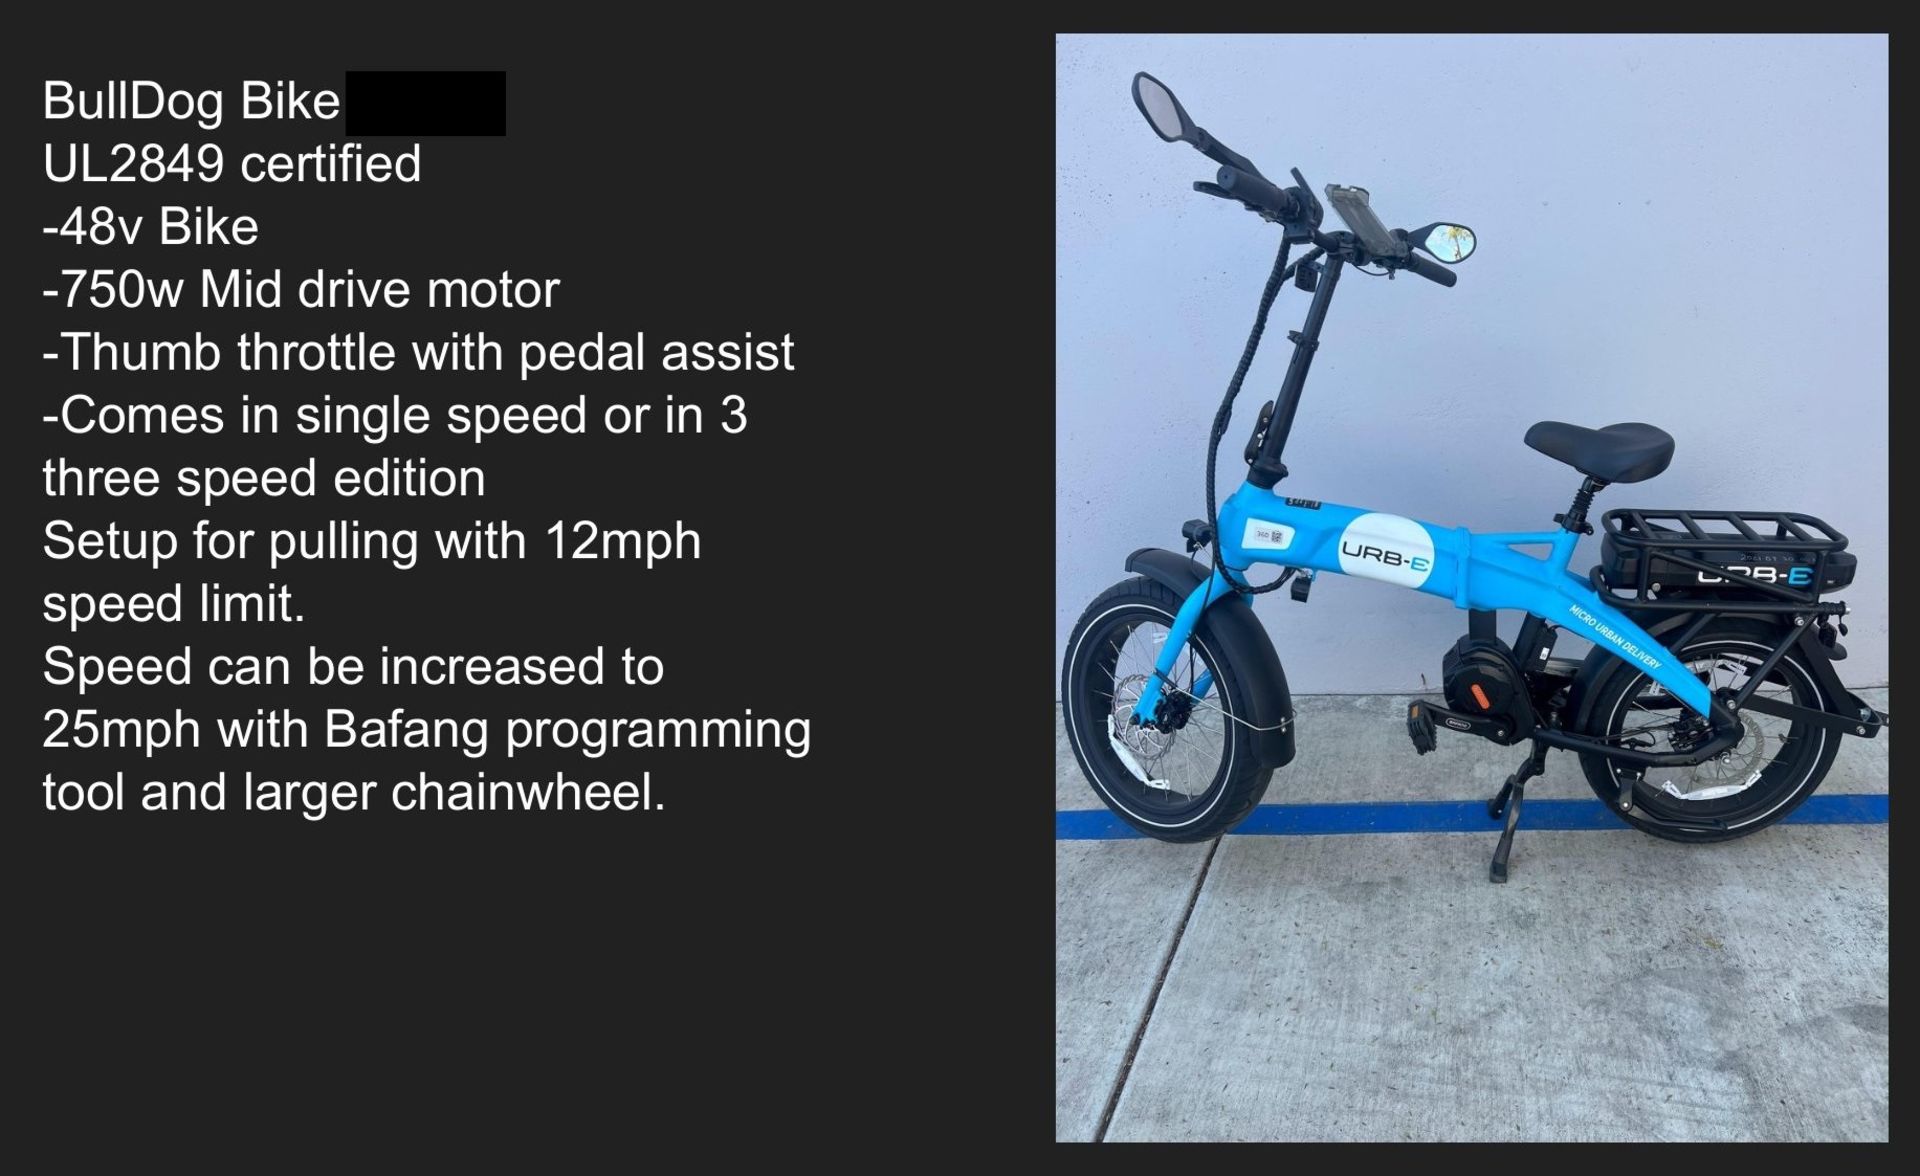 URB-E ELECTRIC DELIVERY BIKE, NEW, 750W MID DRIVE MOTOR, SINGLE SPEED, THUMB THROTTLE WITH PEDAL - Bild 6 aus 6